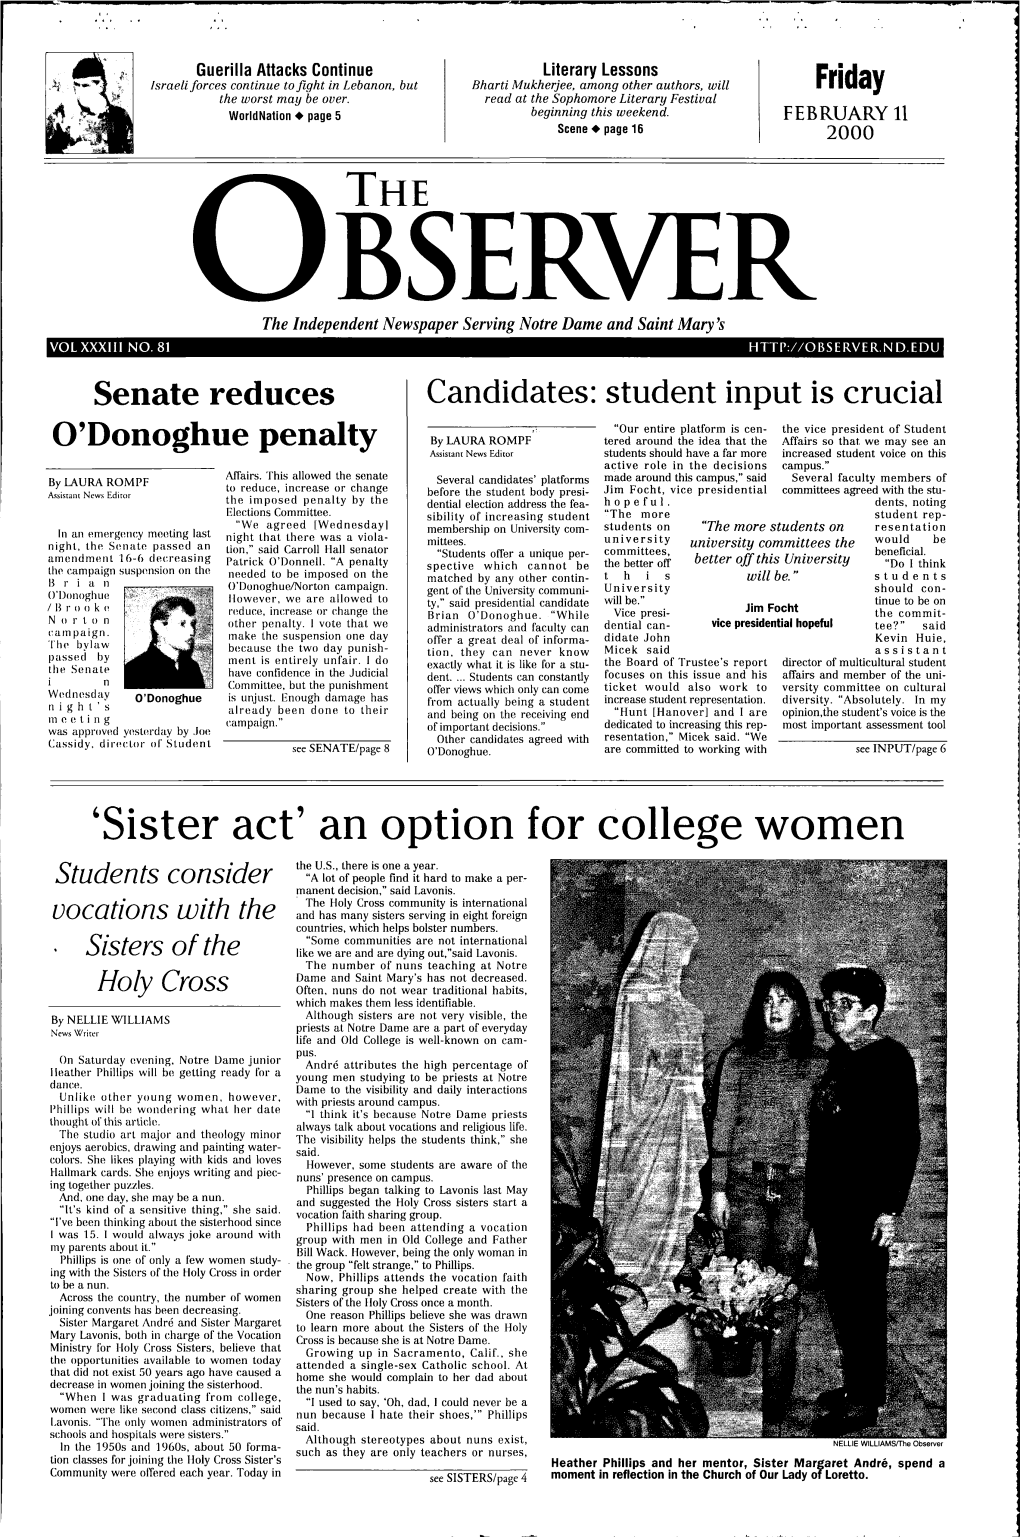 'Sister Act' an Option for College Women